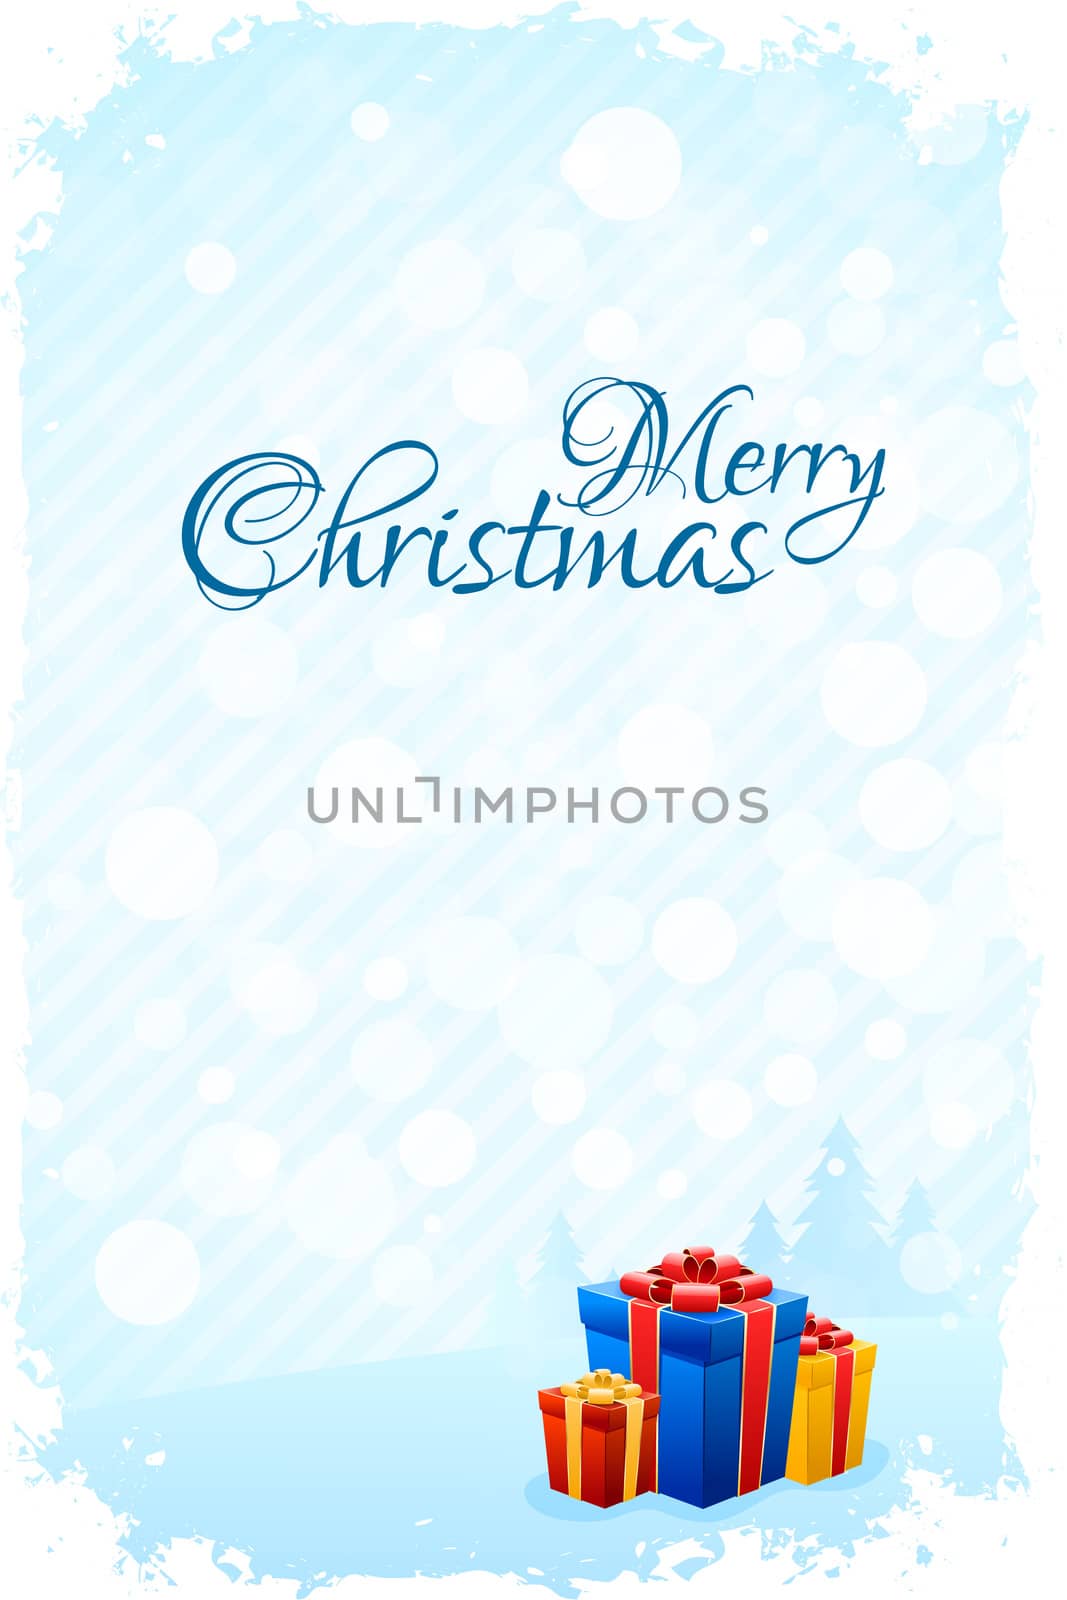 Grungy Christmas Greeting Card with Presents